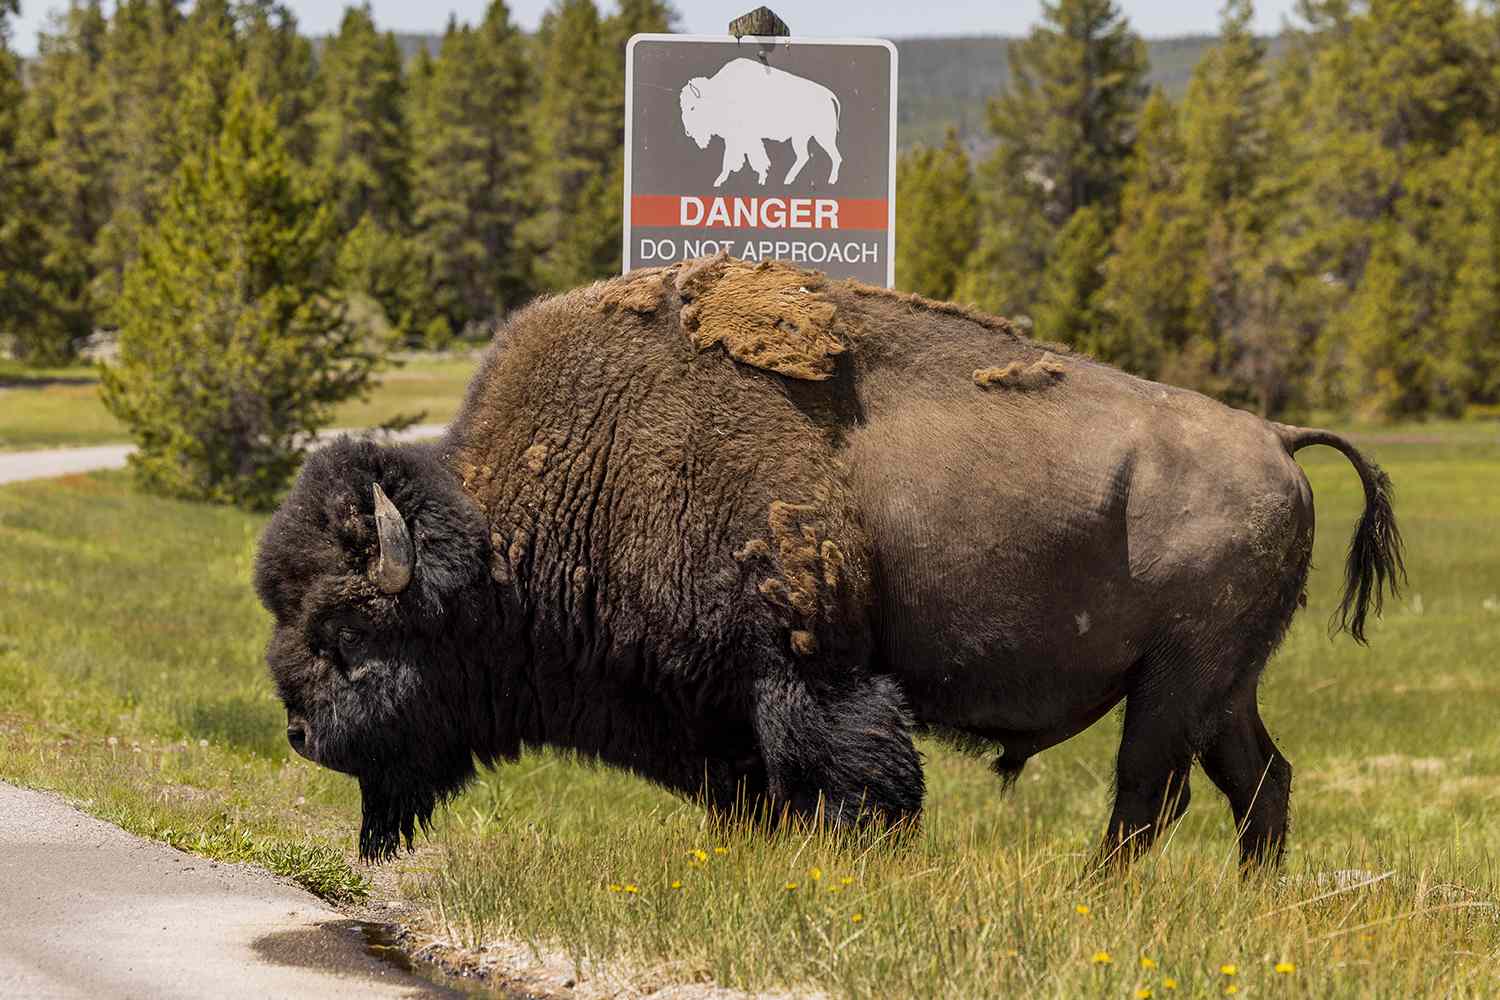 Woman, 83, Lifted ‘About a Foot Off the Ground’ by Bison’s Horns [Video]